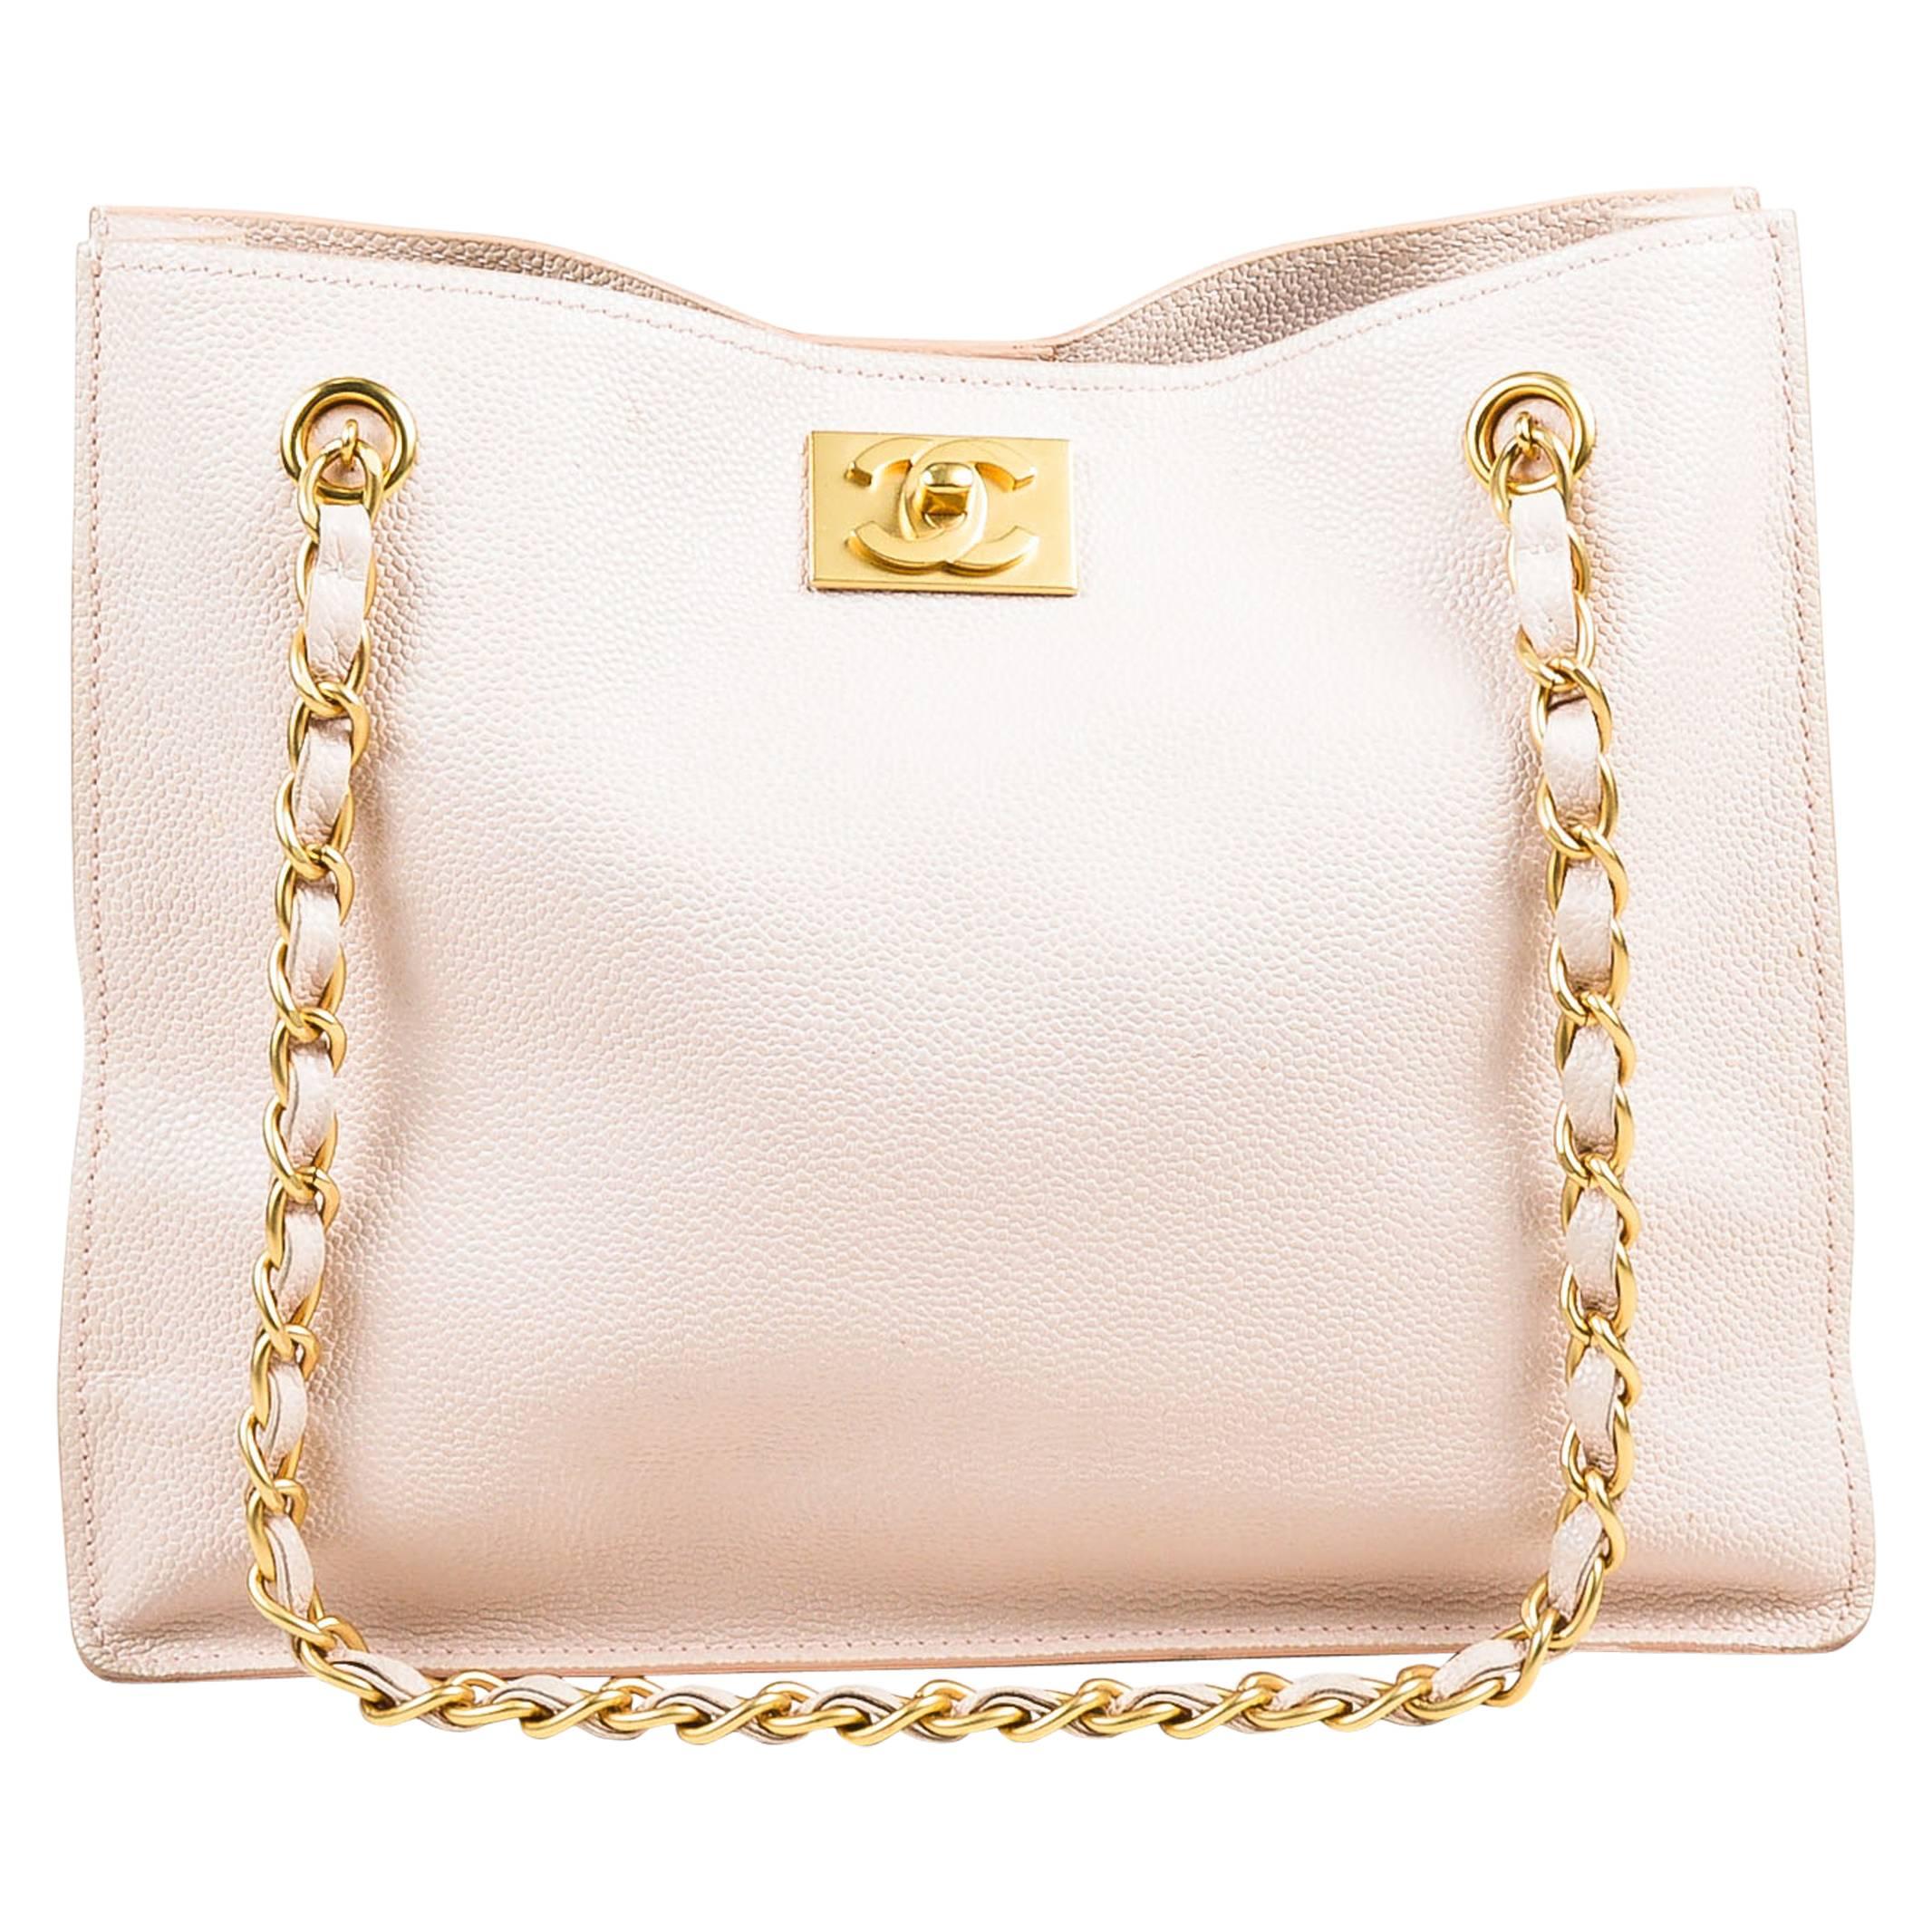 Chanel Blush Pink & Brushed Gold Tone Caviar Leather 'CC' Shopper Tote For Sale